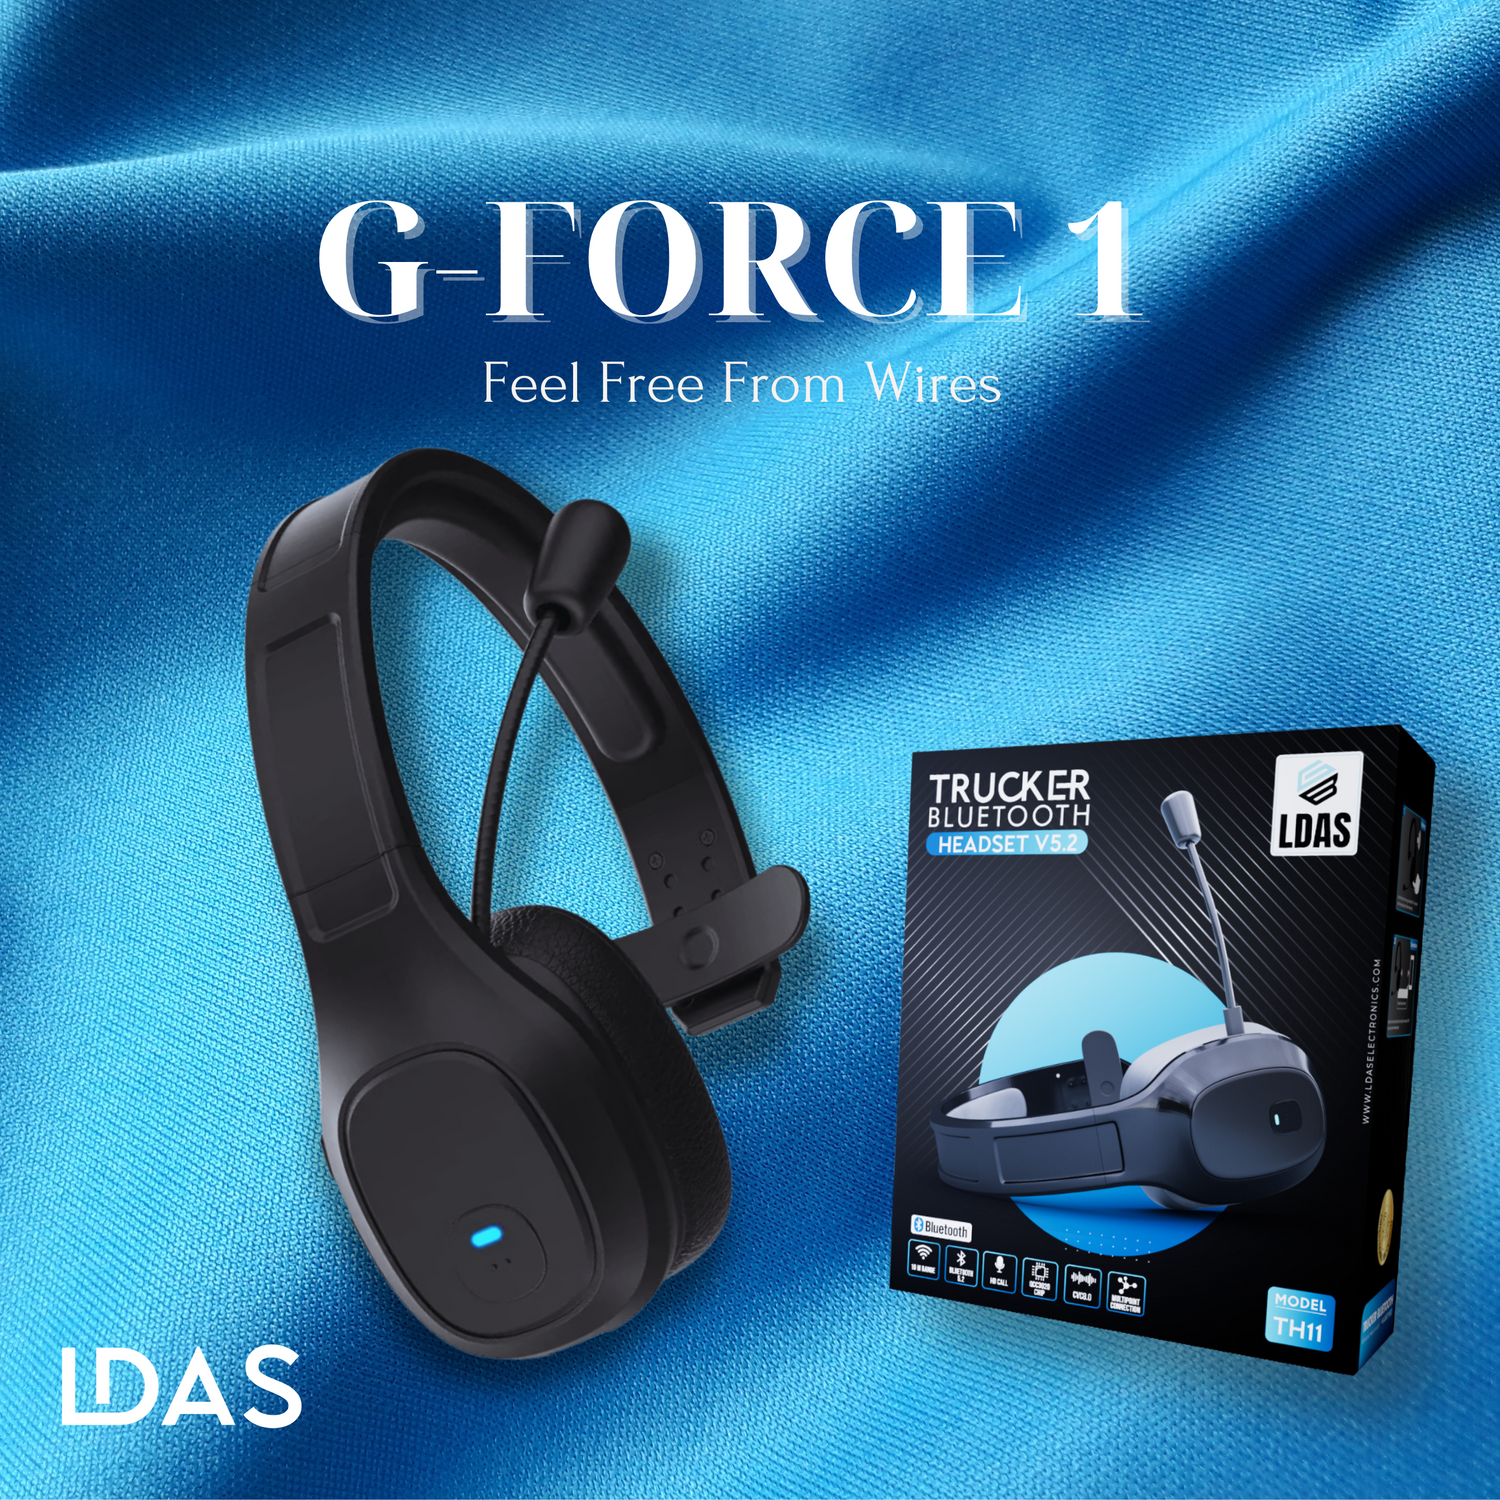 LDAS top quality  headset with box and G-FORCE 1 with logo 